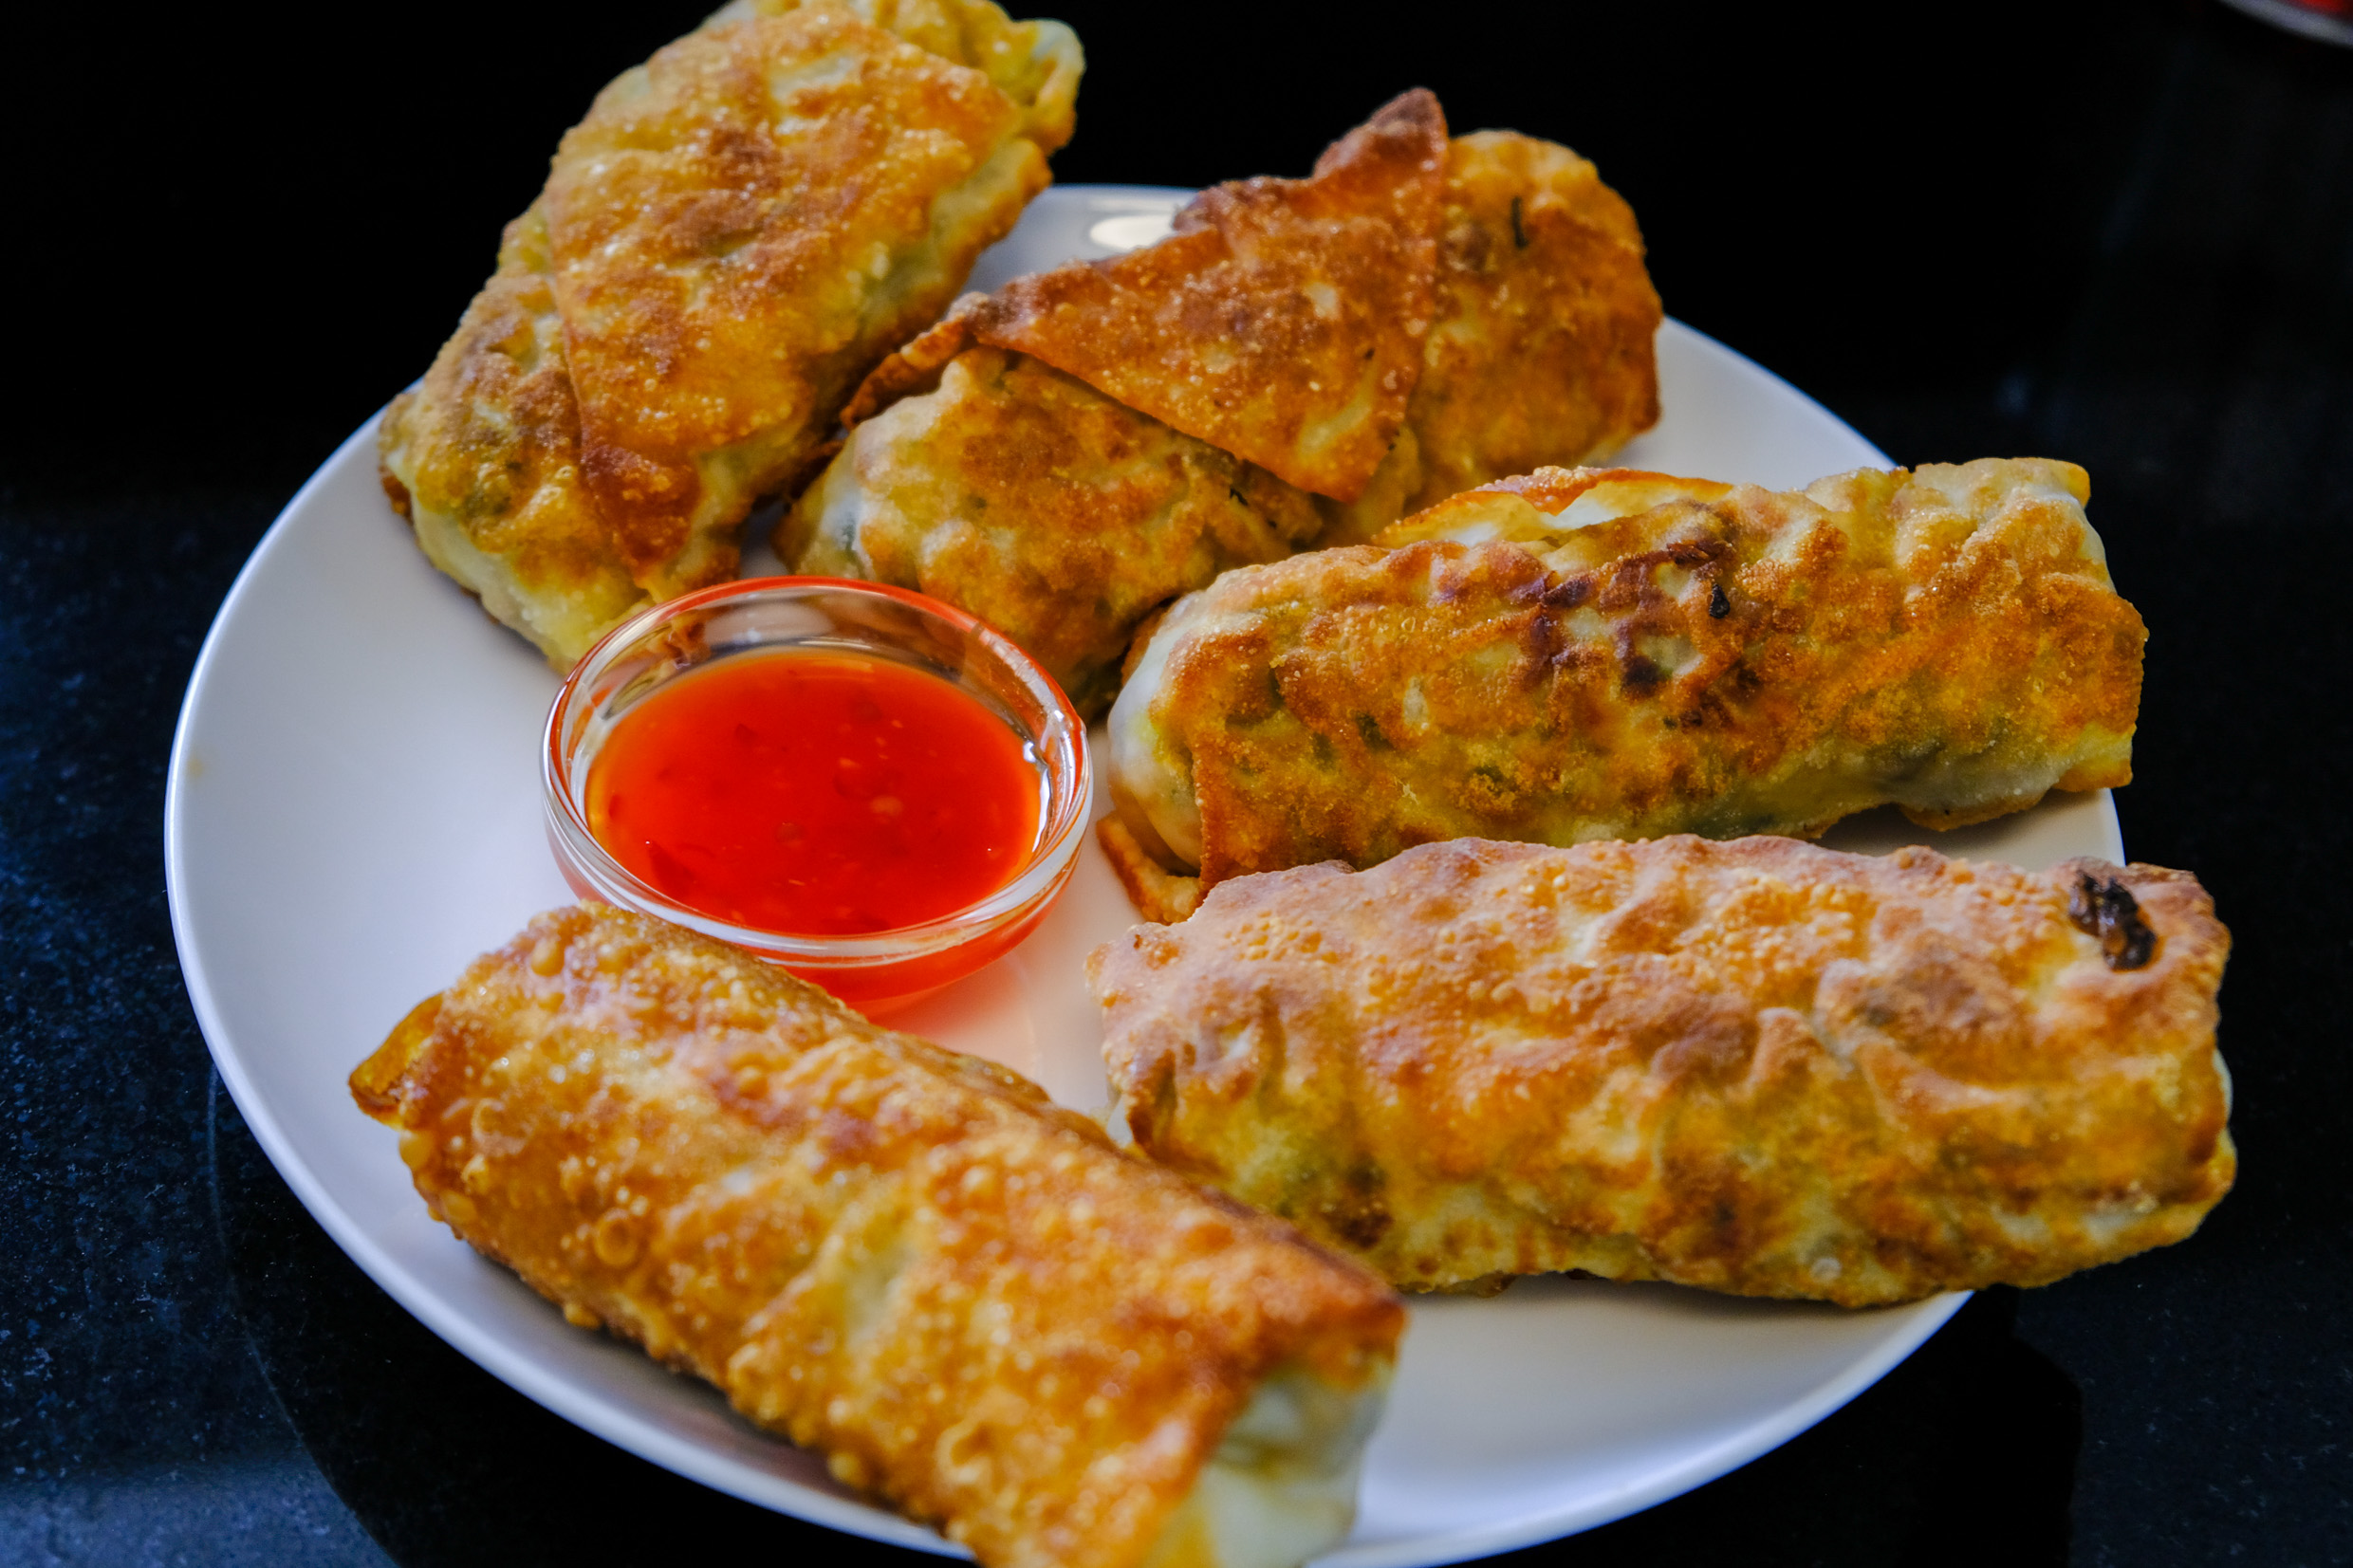 eggrolls recipe | food recipes | recipes without ads